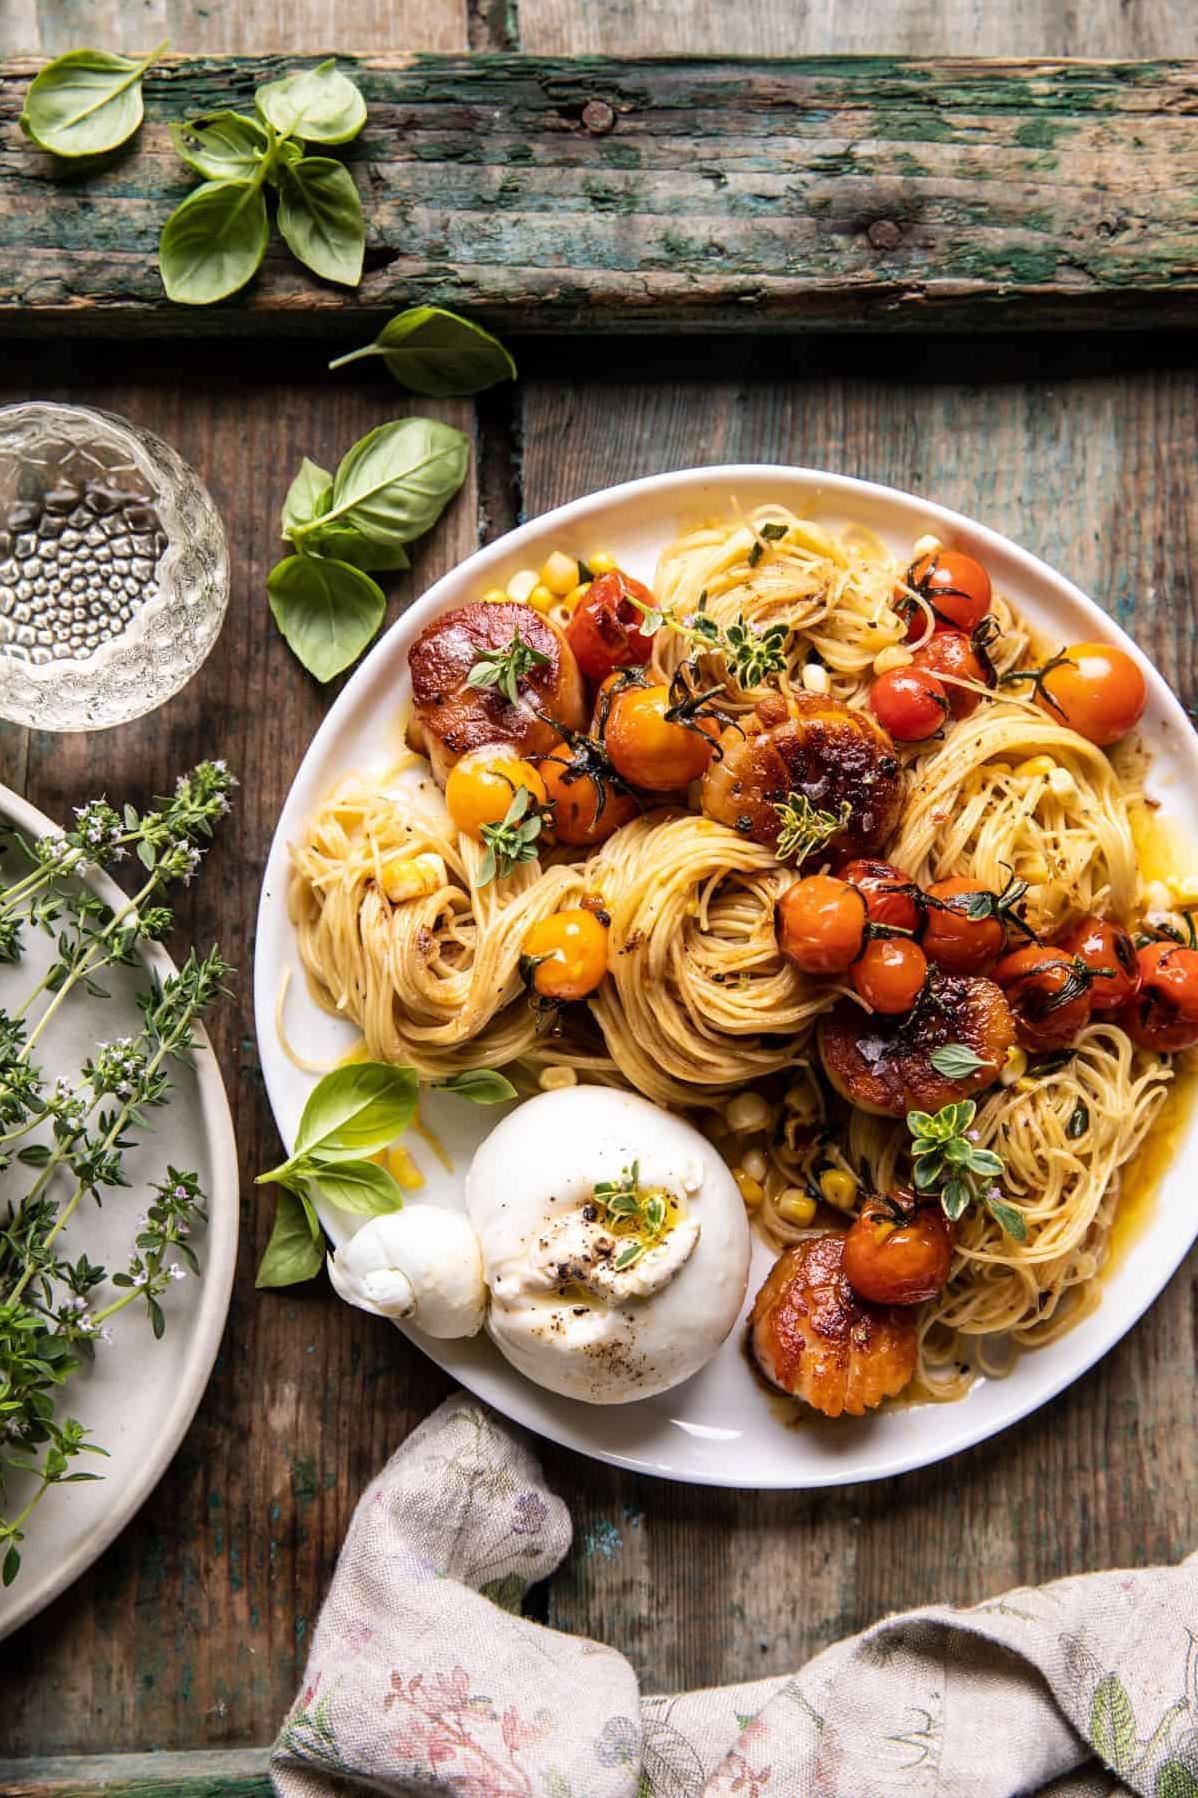  Indulge in this gluten-free and dairy-free pasta with delicate seared scallops to satisfy your seafood cravings.